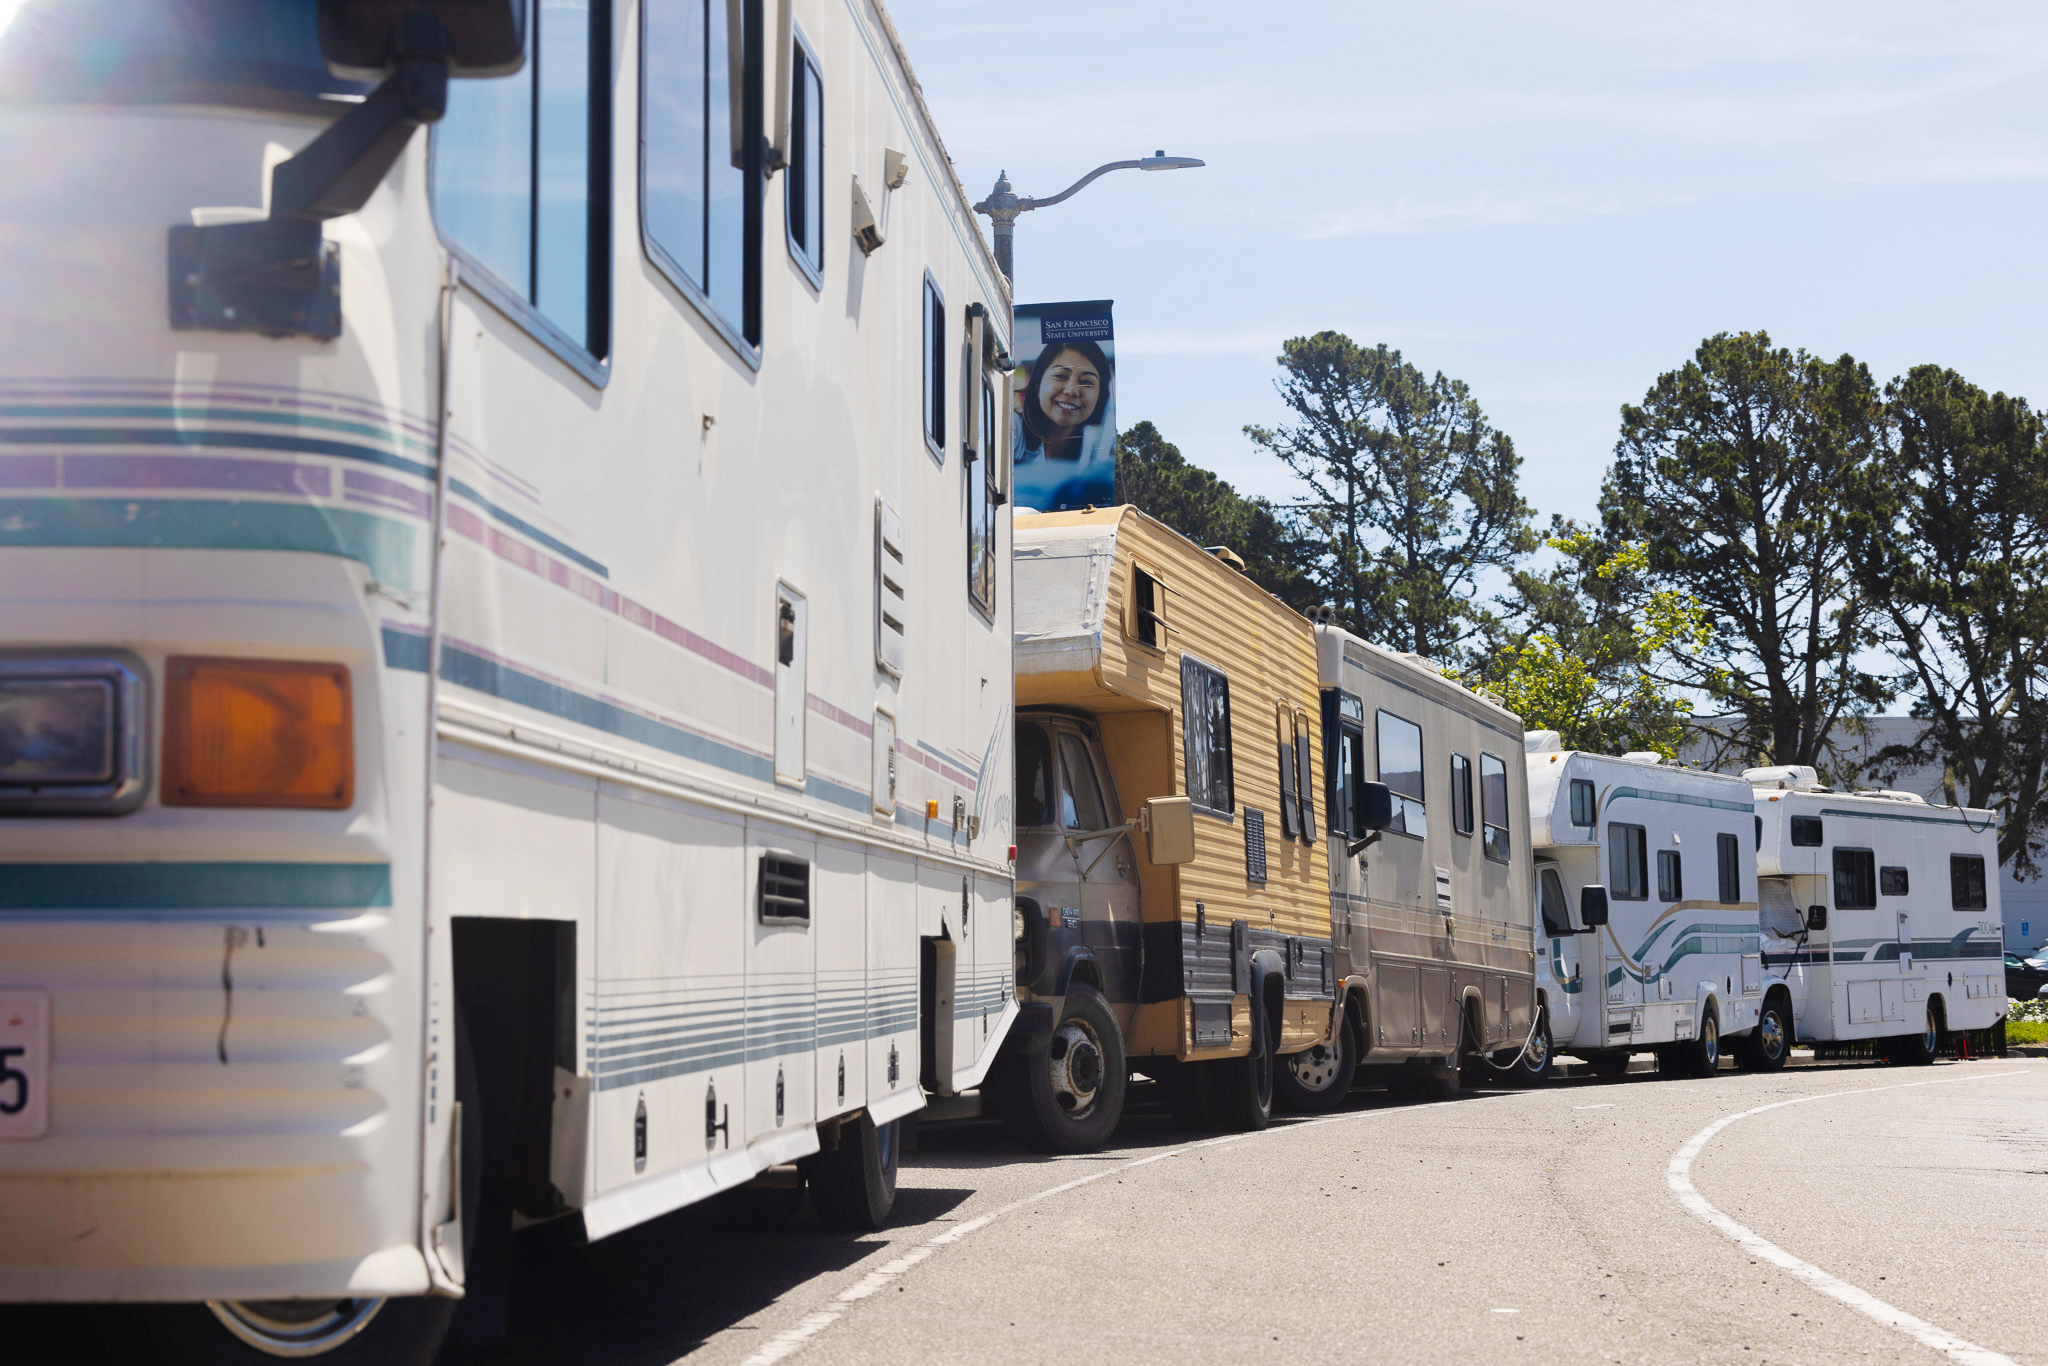 Several RVs parked closely along a roadside under a sunny sky, with trees and a banner featuring a smiling woman in the background.